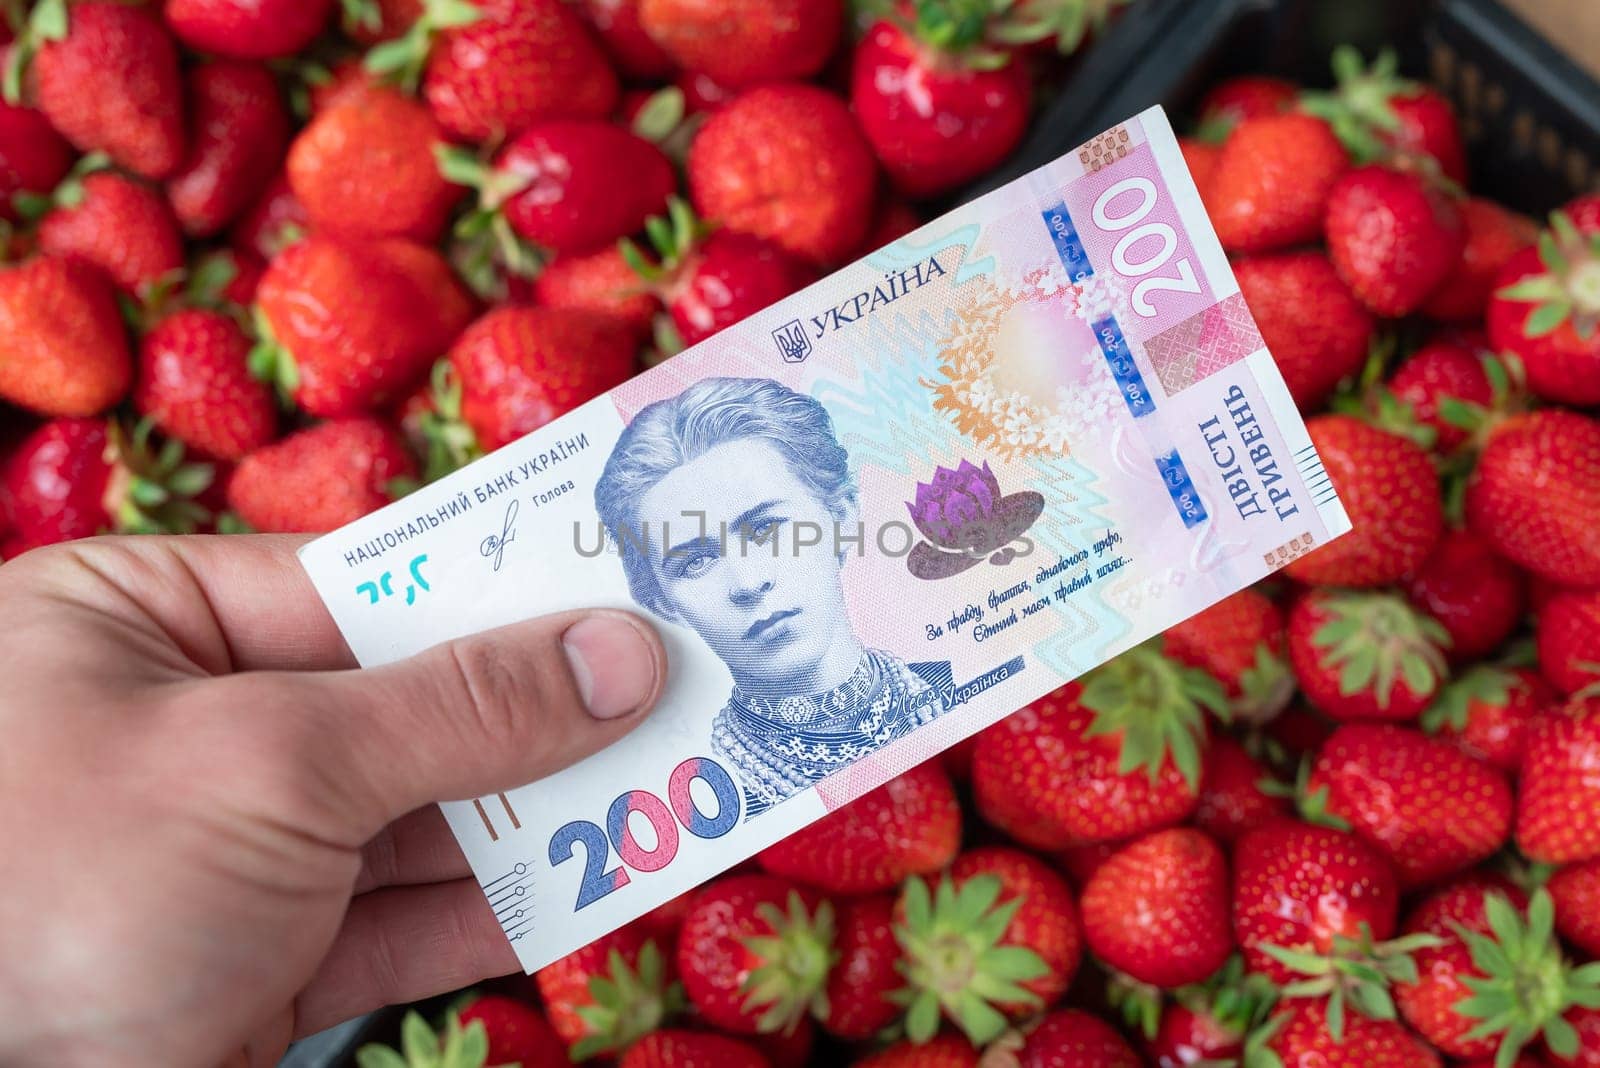 Giving 200 hryvnias banknote to a strawberry seller by VitaliiPetrushenko